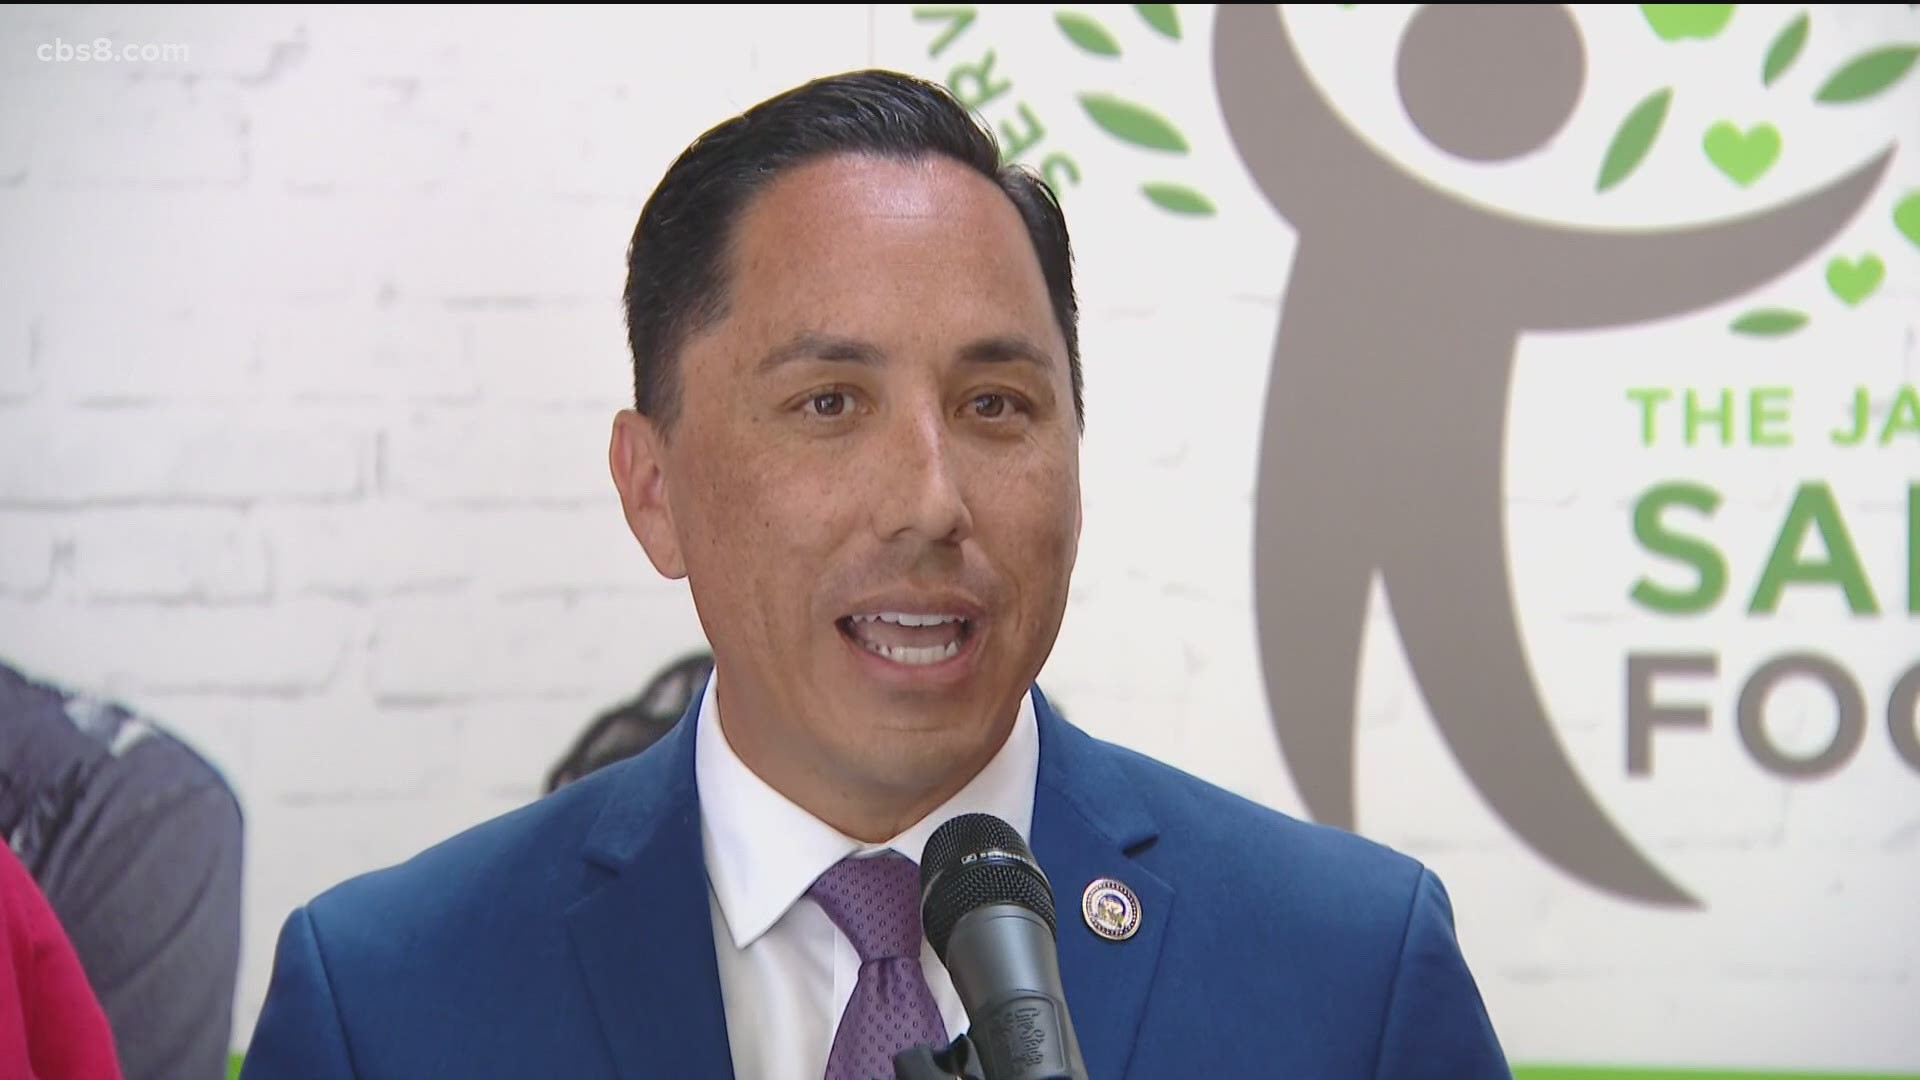 Bry congratulated Gloria late on Monday making Todd Gloria the winner in the race to be San Diego’s next mayor replacing Kevin Faulconer.